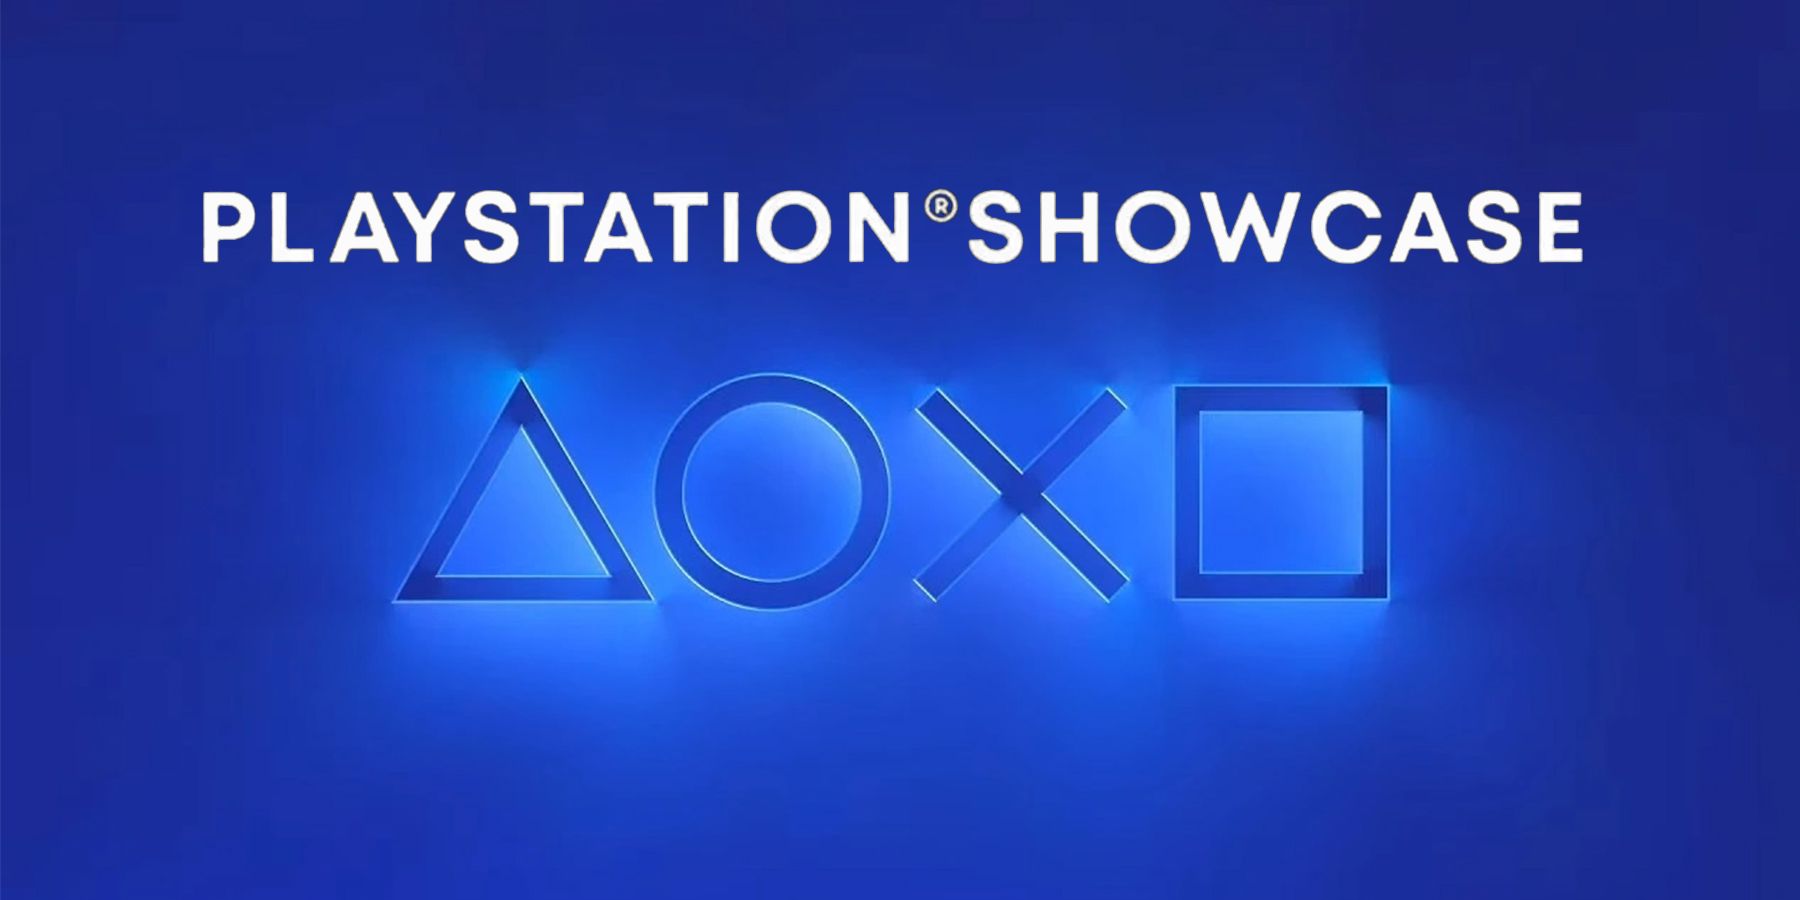 May 24 Is a Chance to Make Good on a Past PlayStation Showcase